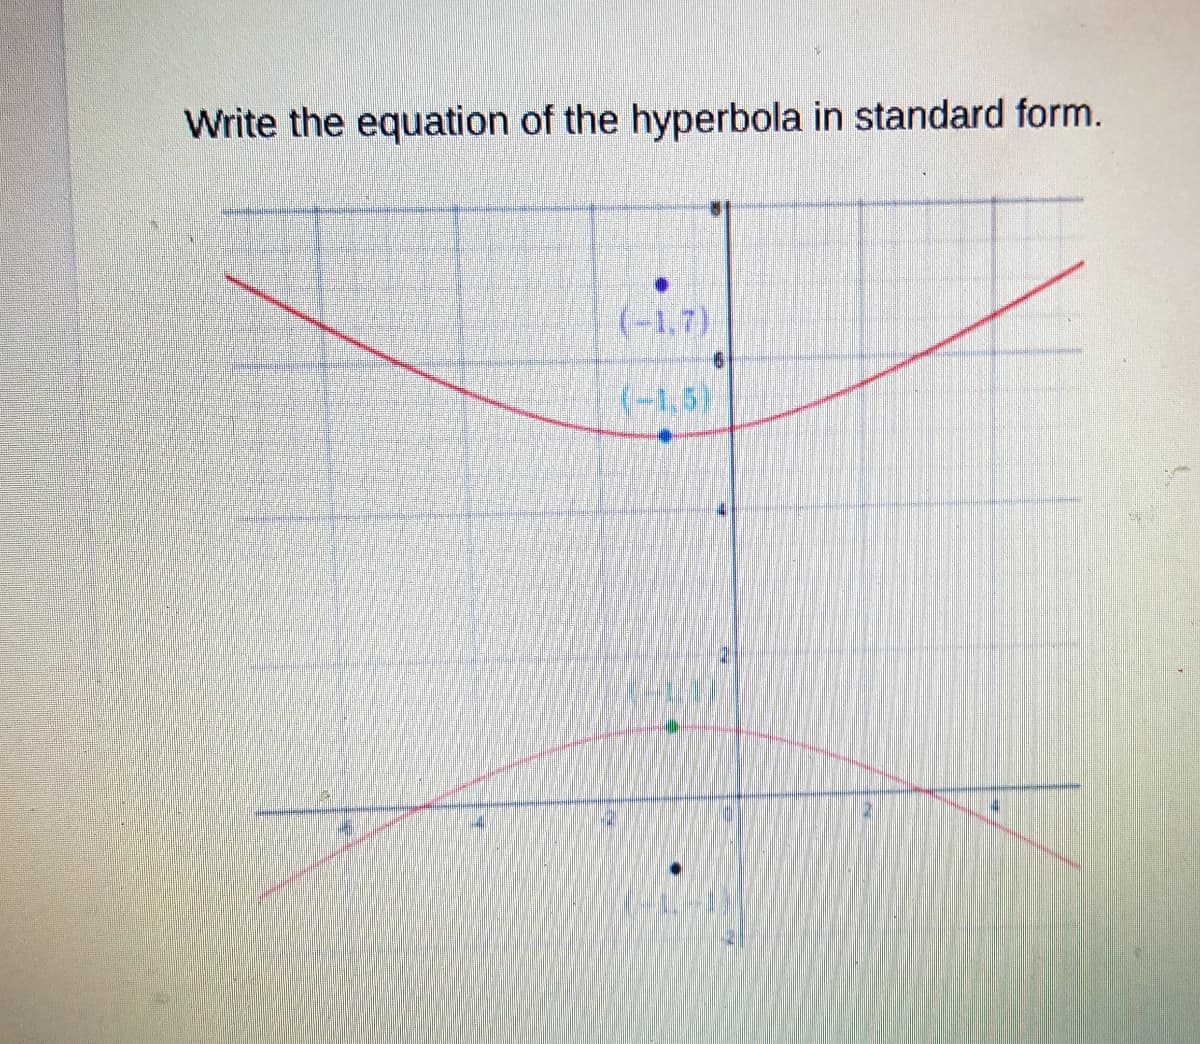 Write the equation of the hyperbola in standard form.
(-1,7).
(-1,5)
